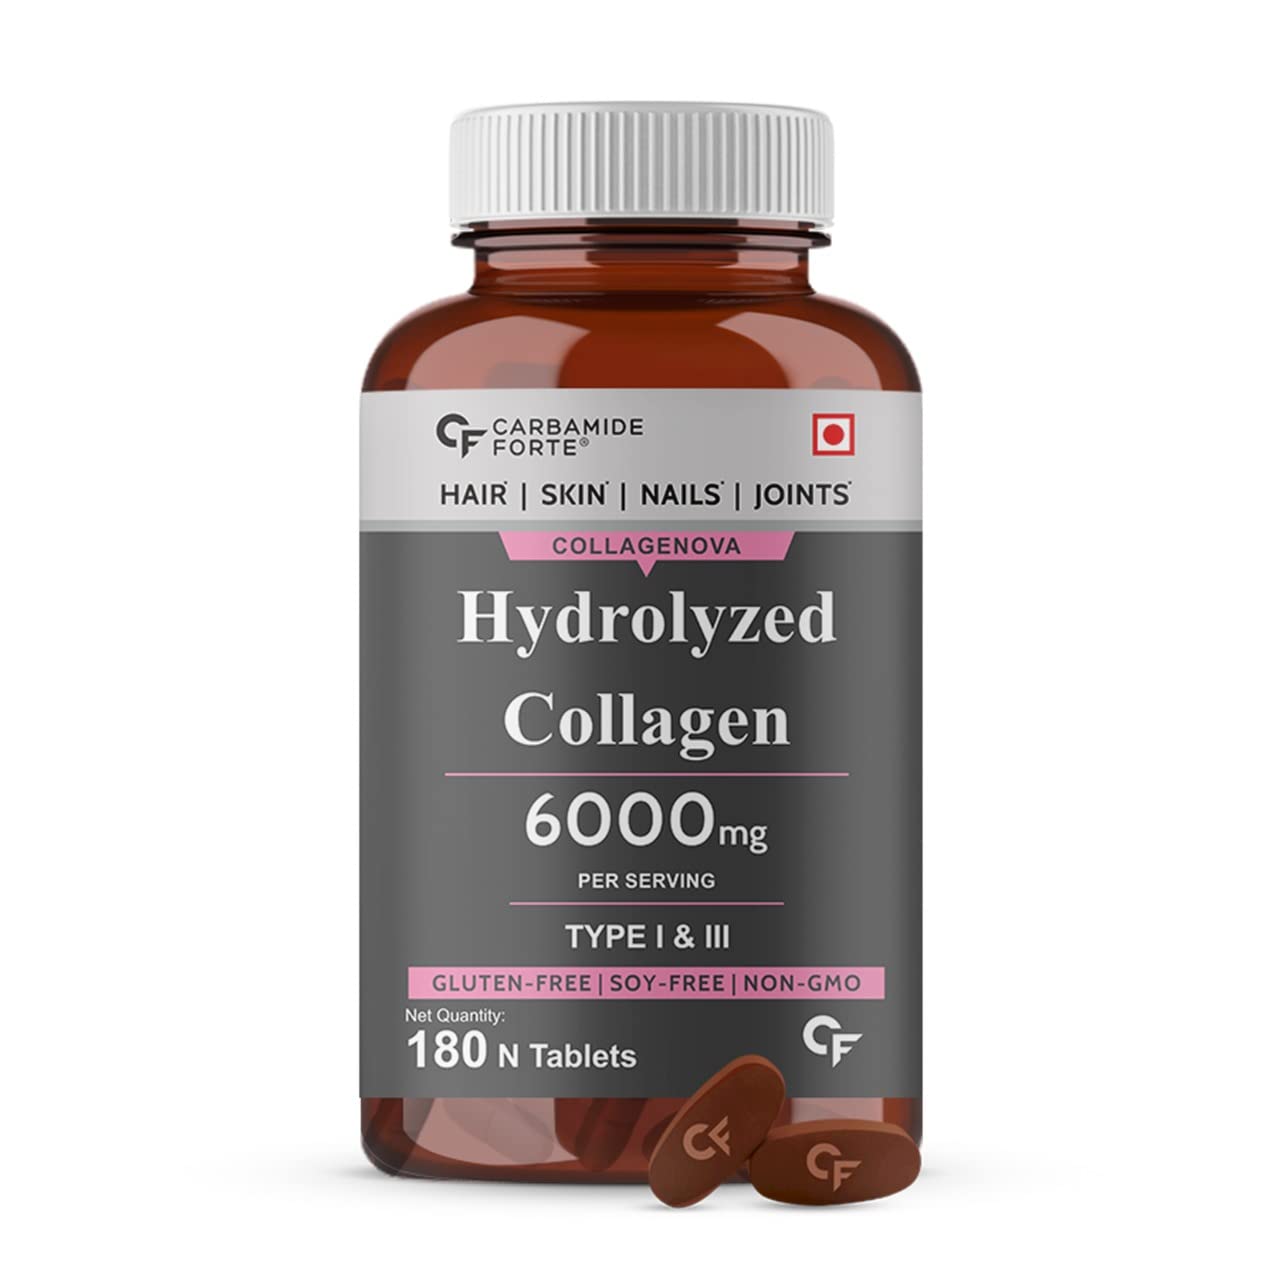 Carbamide Forte Hydrolyzed Collagen Image